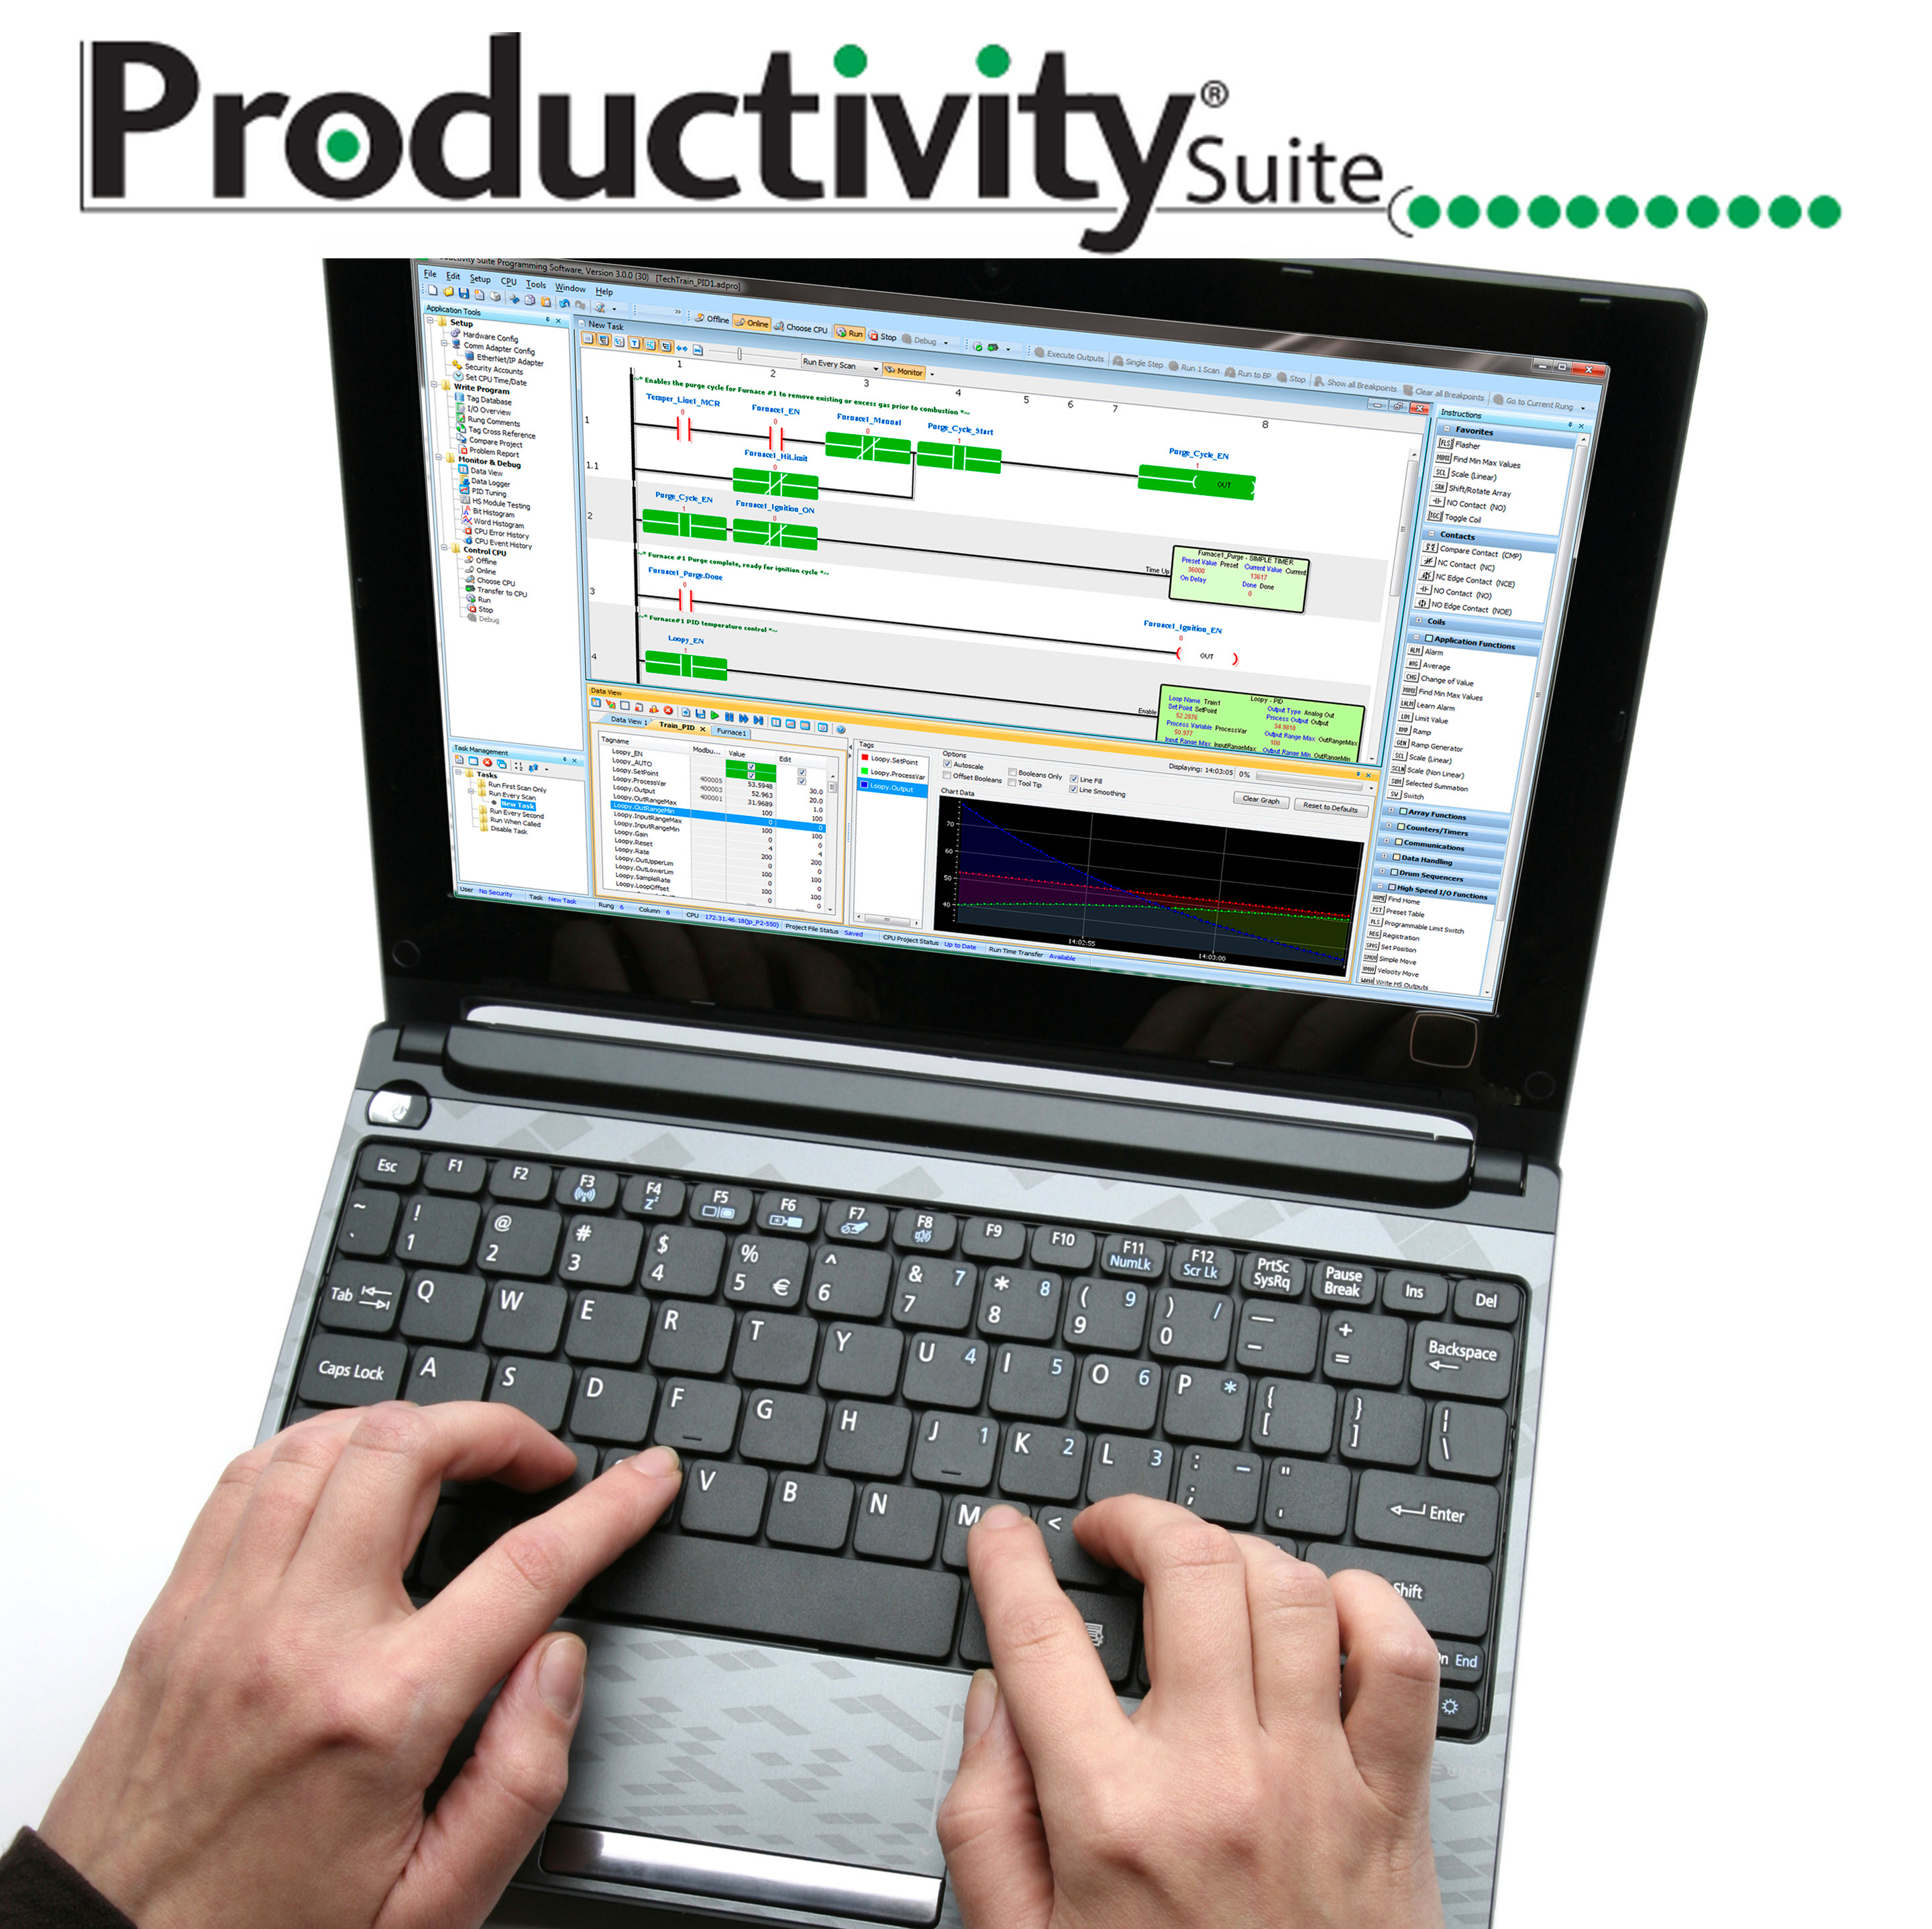 What’s new with the Productivity Suite